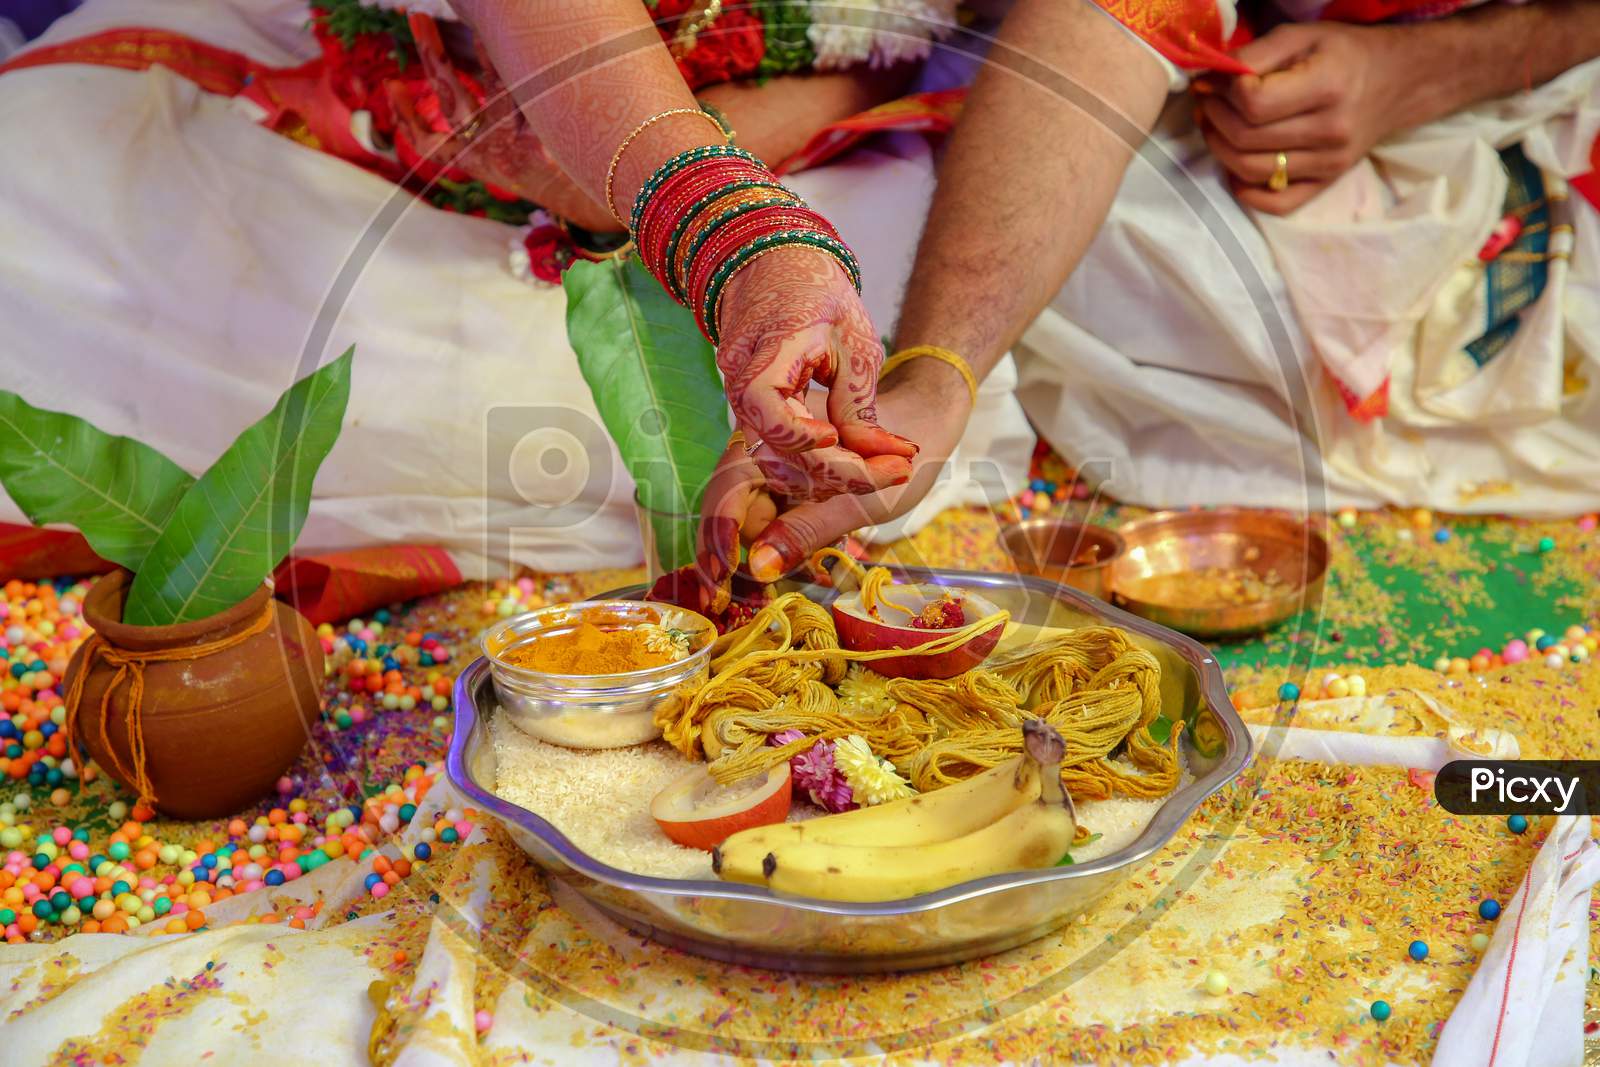 South Indian Wedding Rituals At an Traditional Tamil Bramhins Wedding Ceremony